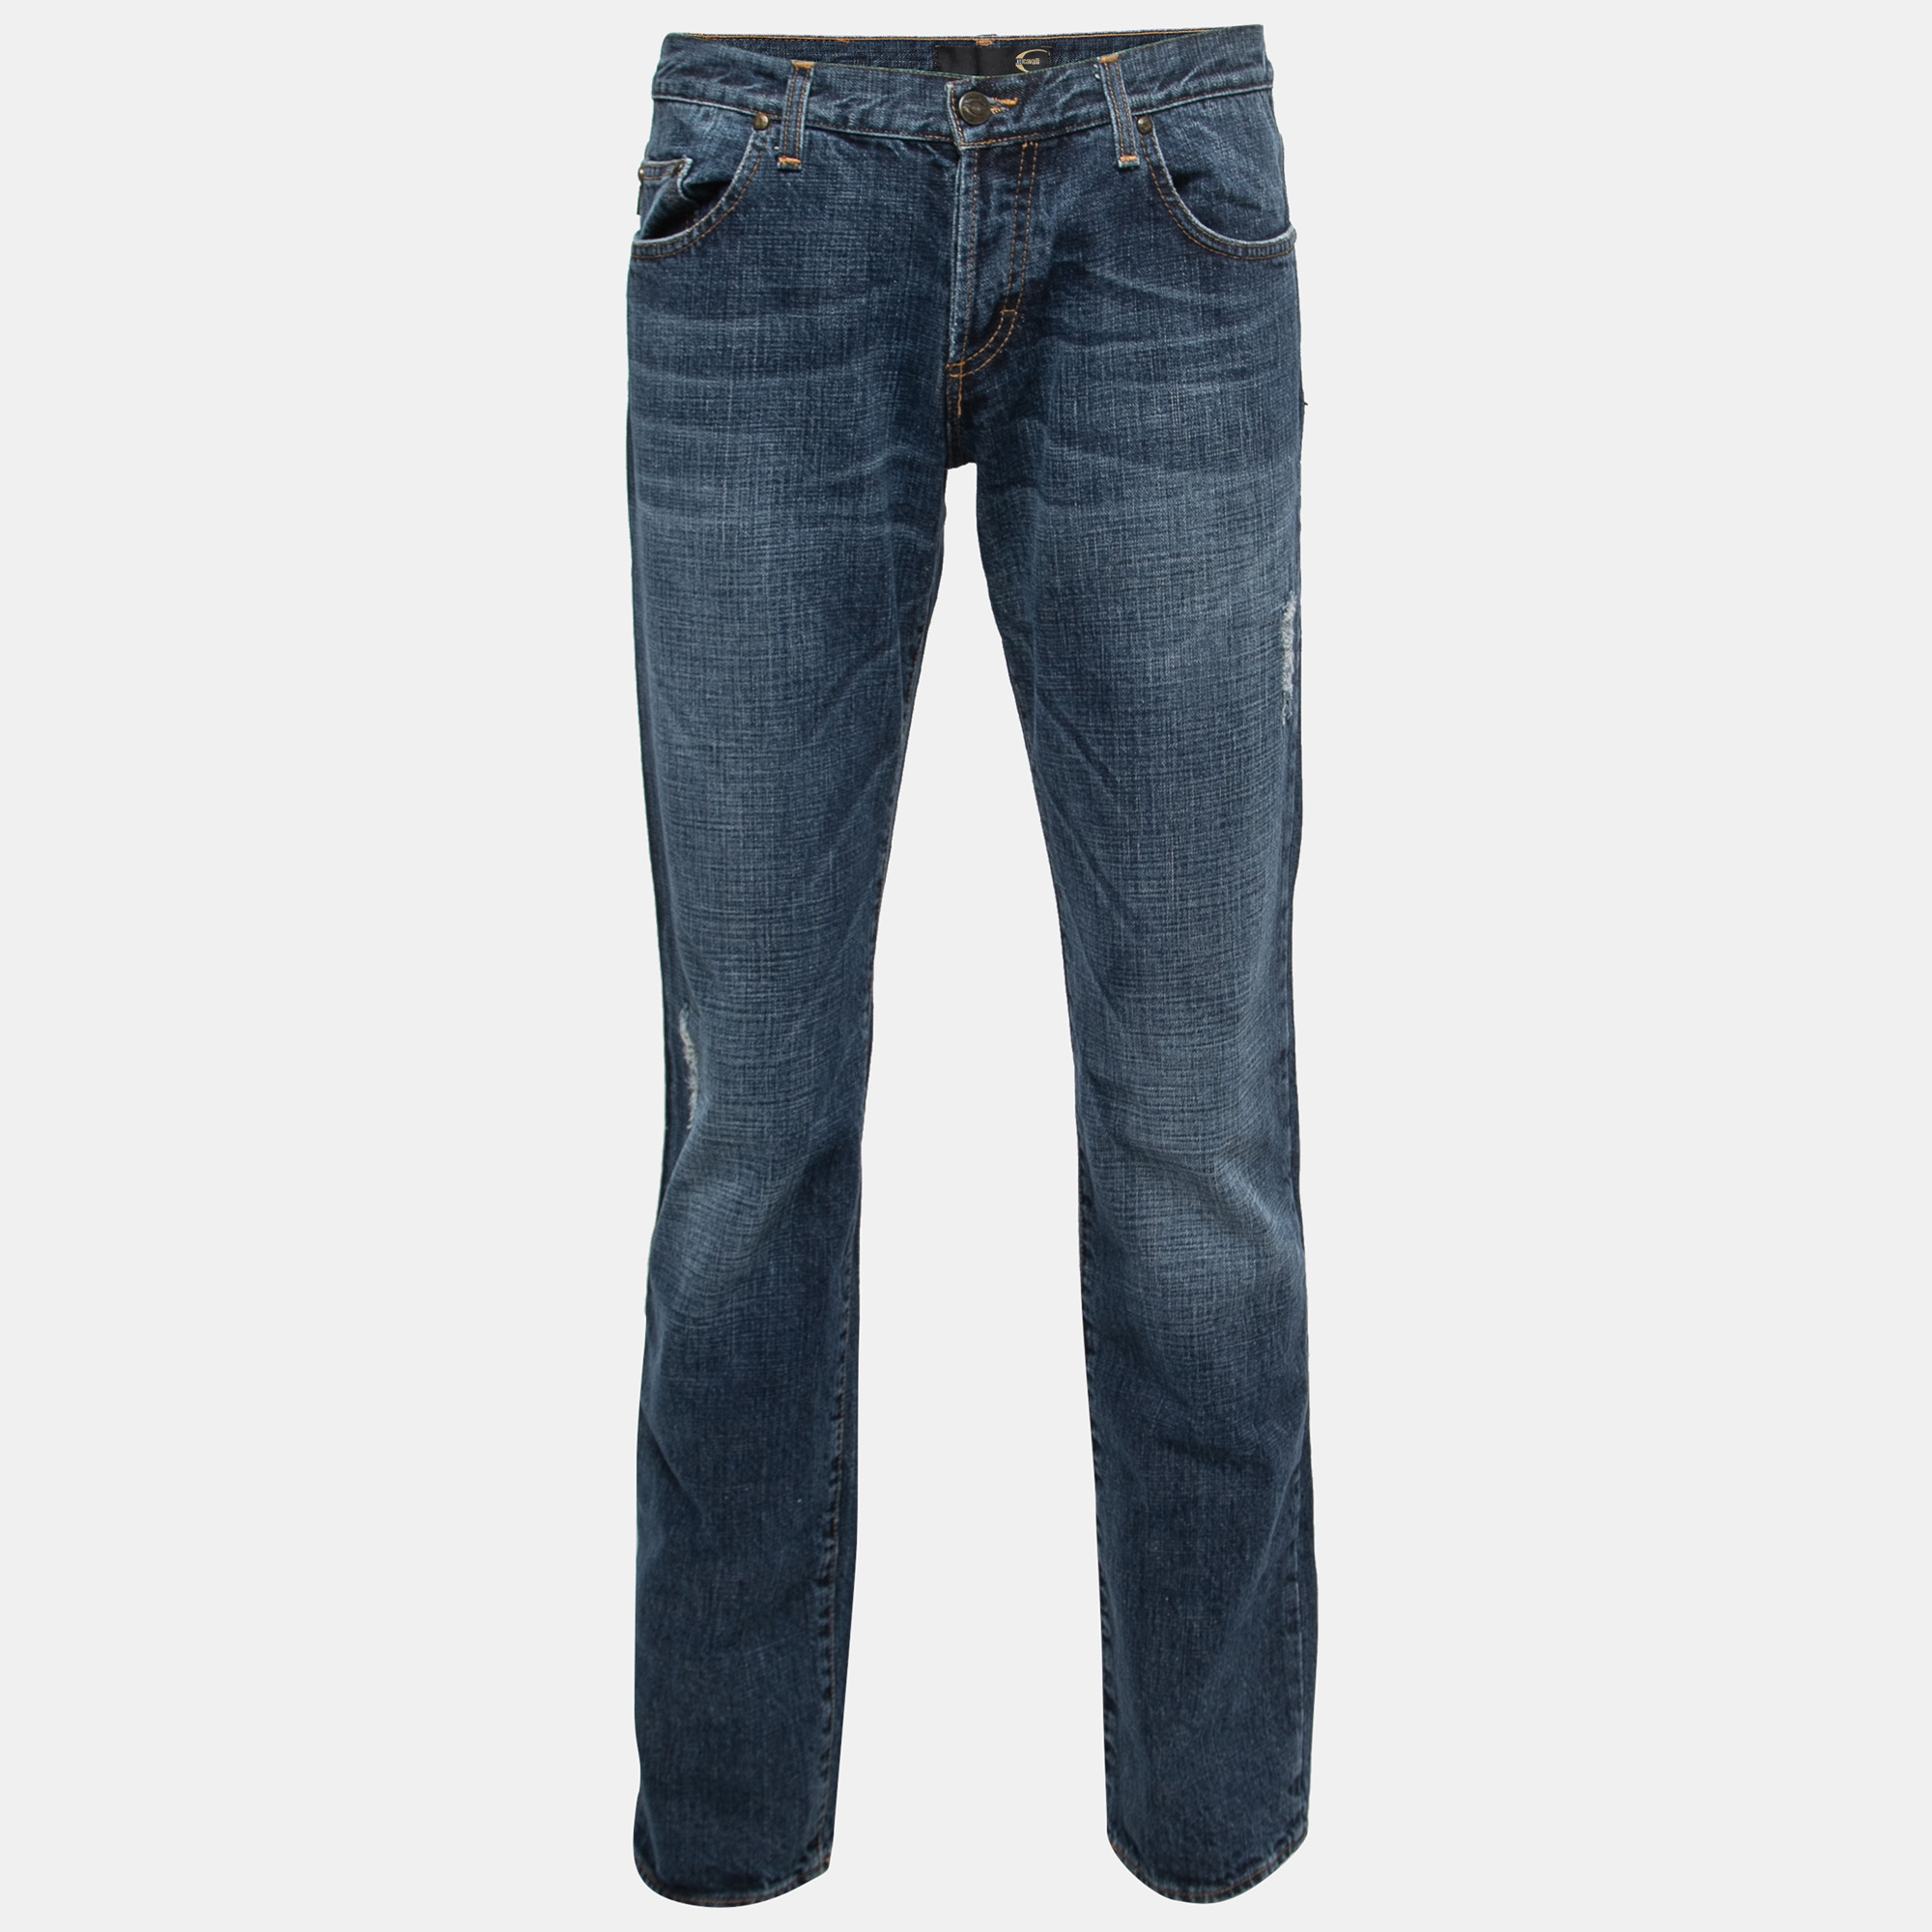 A good pair of jeans always make the closet complete. This pair of jeans is tailored with such skill and style that it will be your favorite in no time. It will give you a comfortable stylish fit.